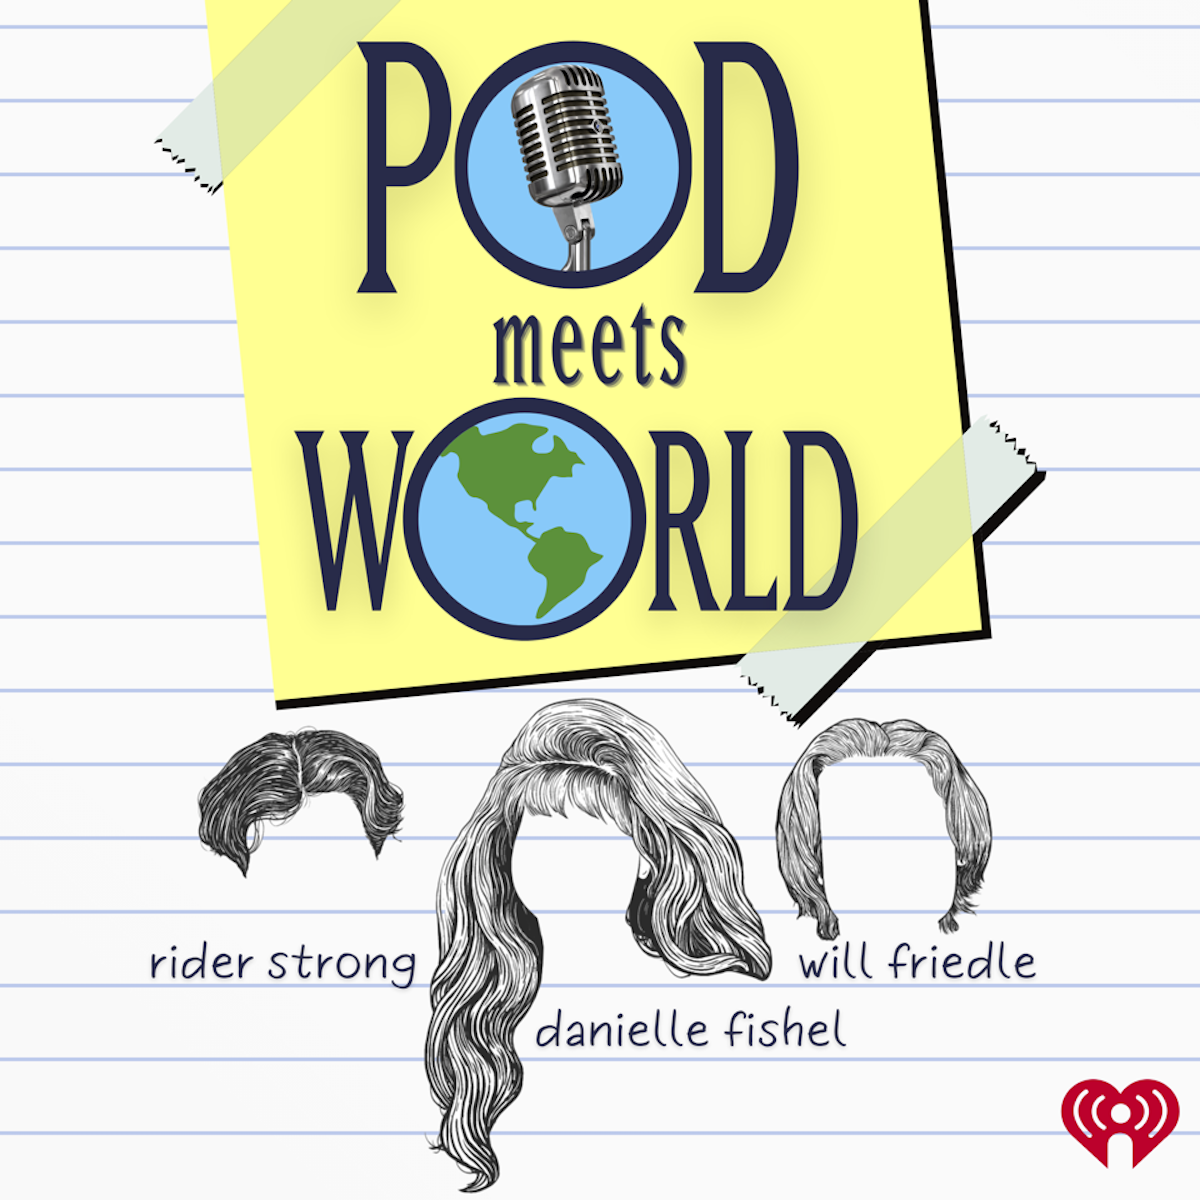 Artwork for the 'Boy Meets World' podcast by Danielle Fishel, Will Friedle, and Rider Strong